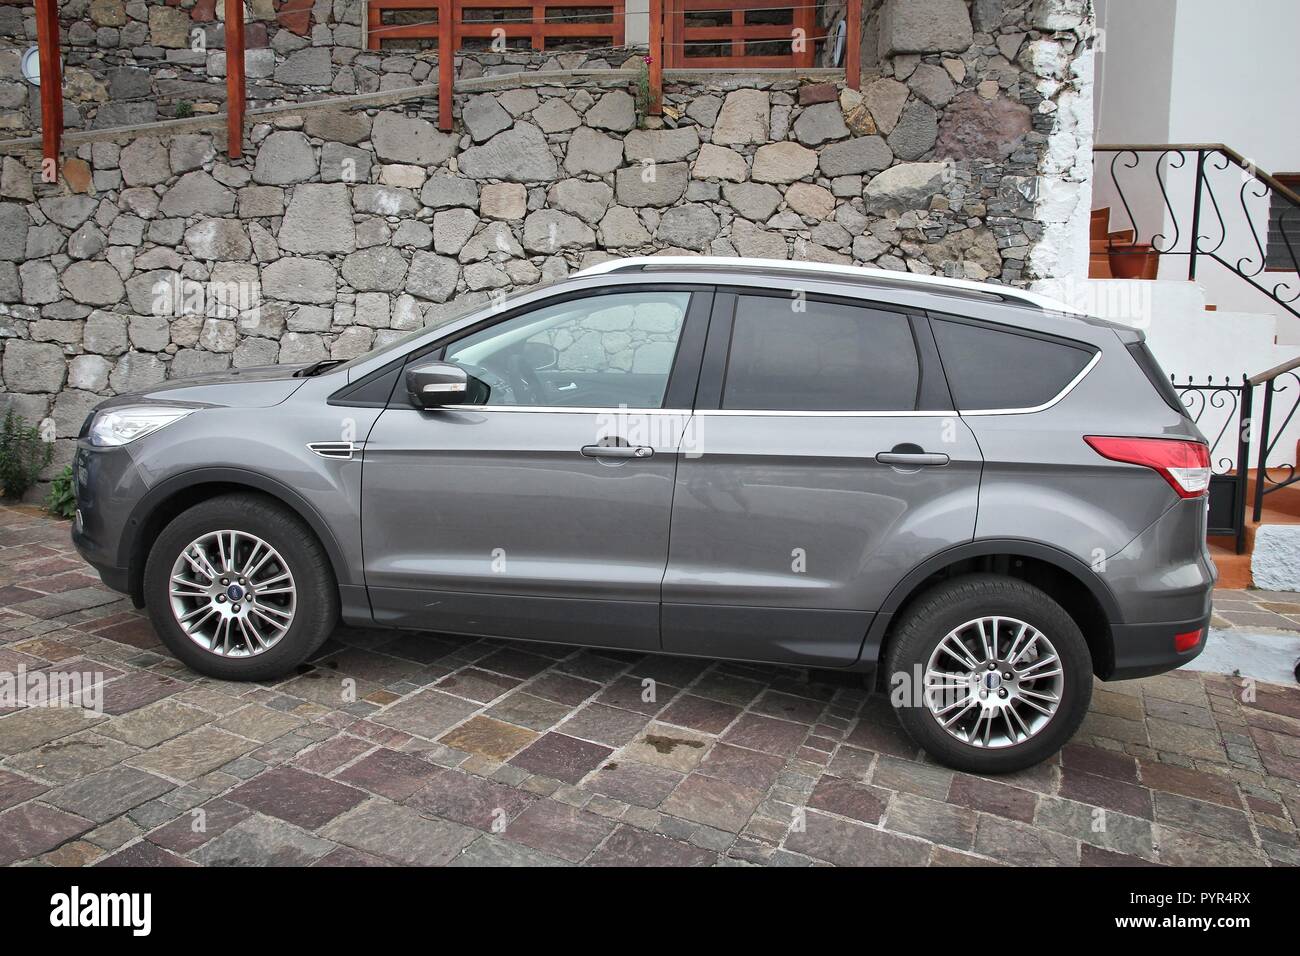 GRAN CANARIA, SPAIN - DECEMBER 5, 2015: Ford Kuga compact SUV car parked in  Gran Canaria, Spain. There are 593 cars per capita in Spain Stock Photo -  Alamy